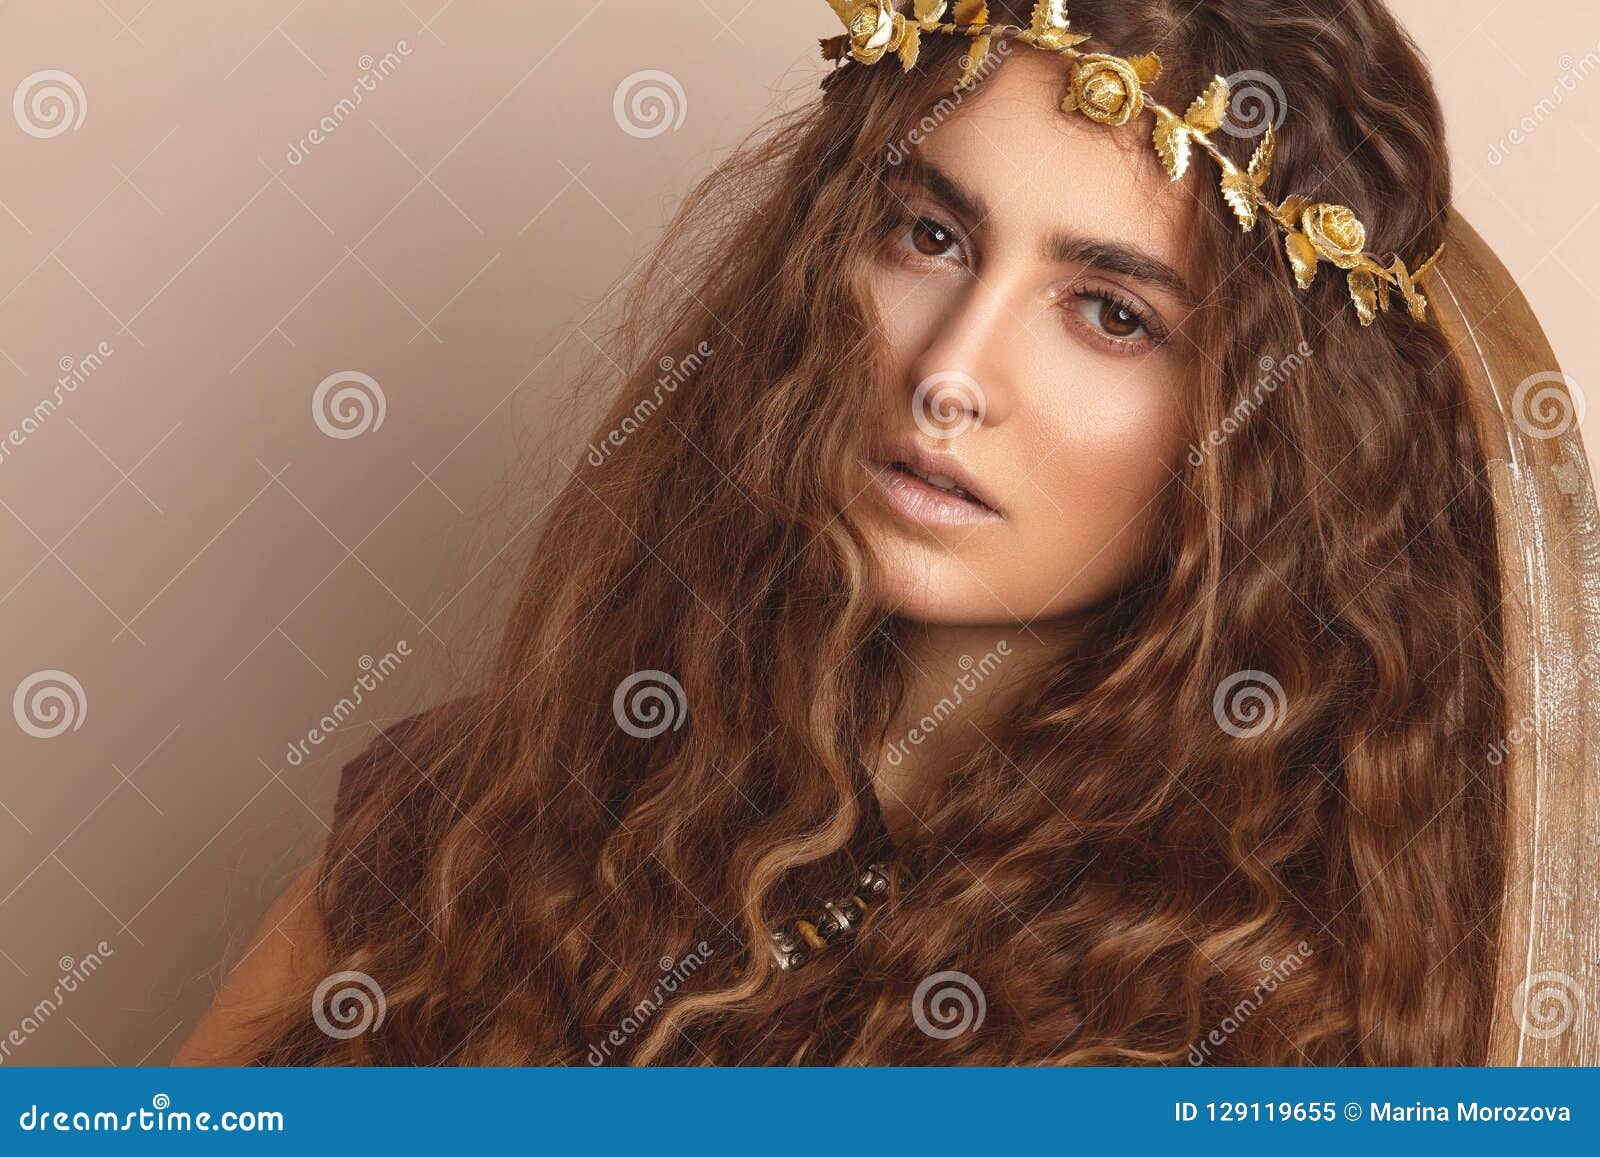 beautiful woman. curly long hair. fashion model. healthy wavy hairstyle. accessories. autumn wreath, gold floral crown